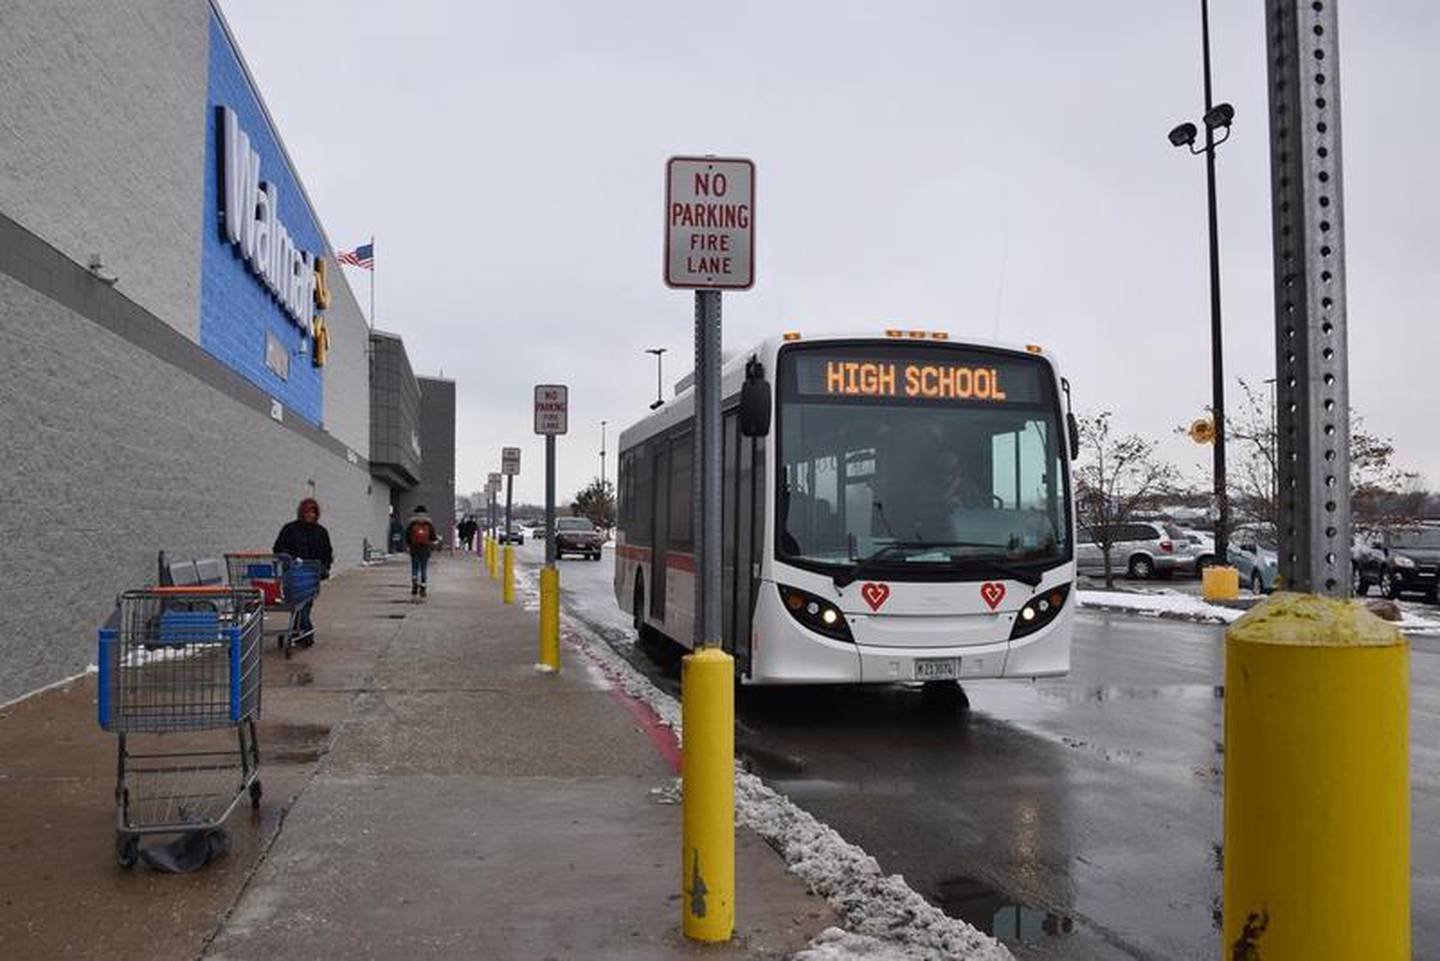 File photo - A Route 21 bus to Sycamore arrives at the Wal-Mart in DeKalb on Thursday, Nov. 14, 2019.